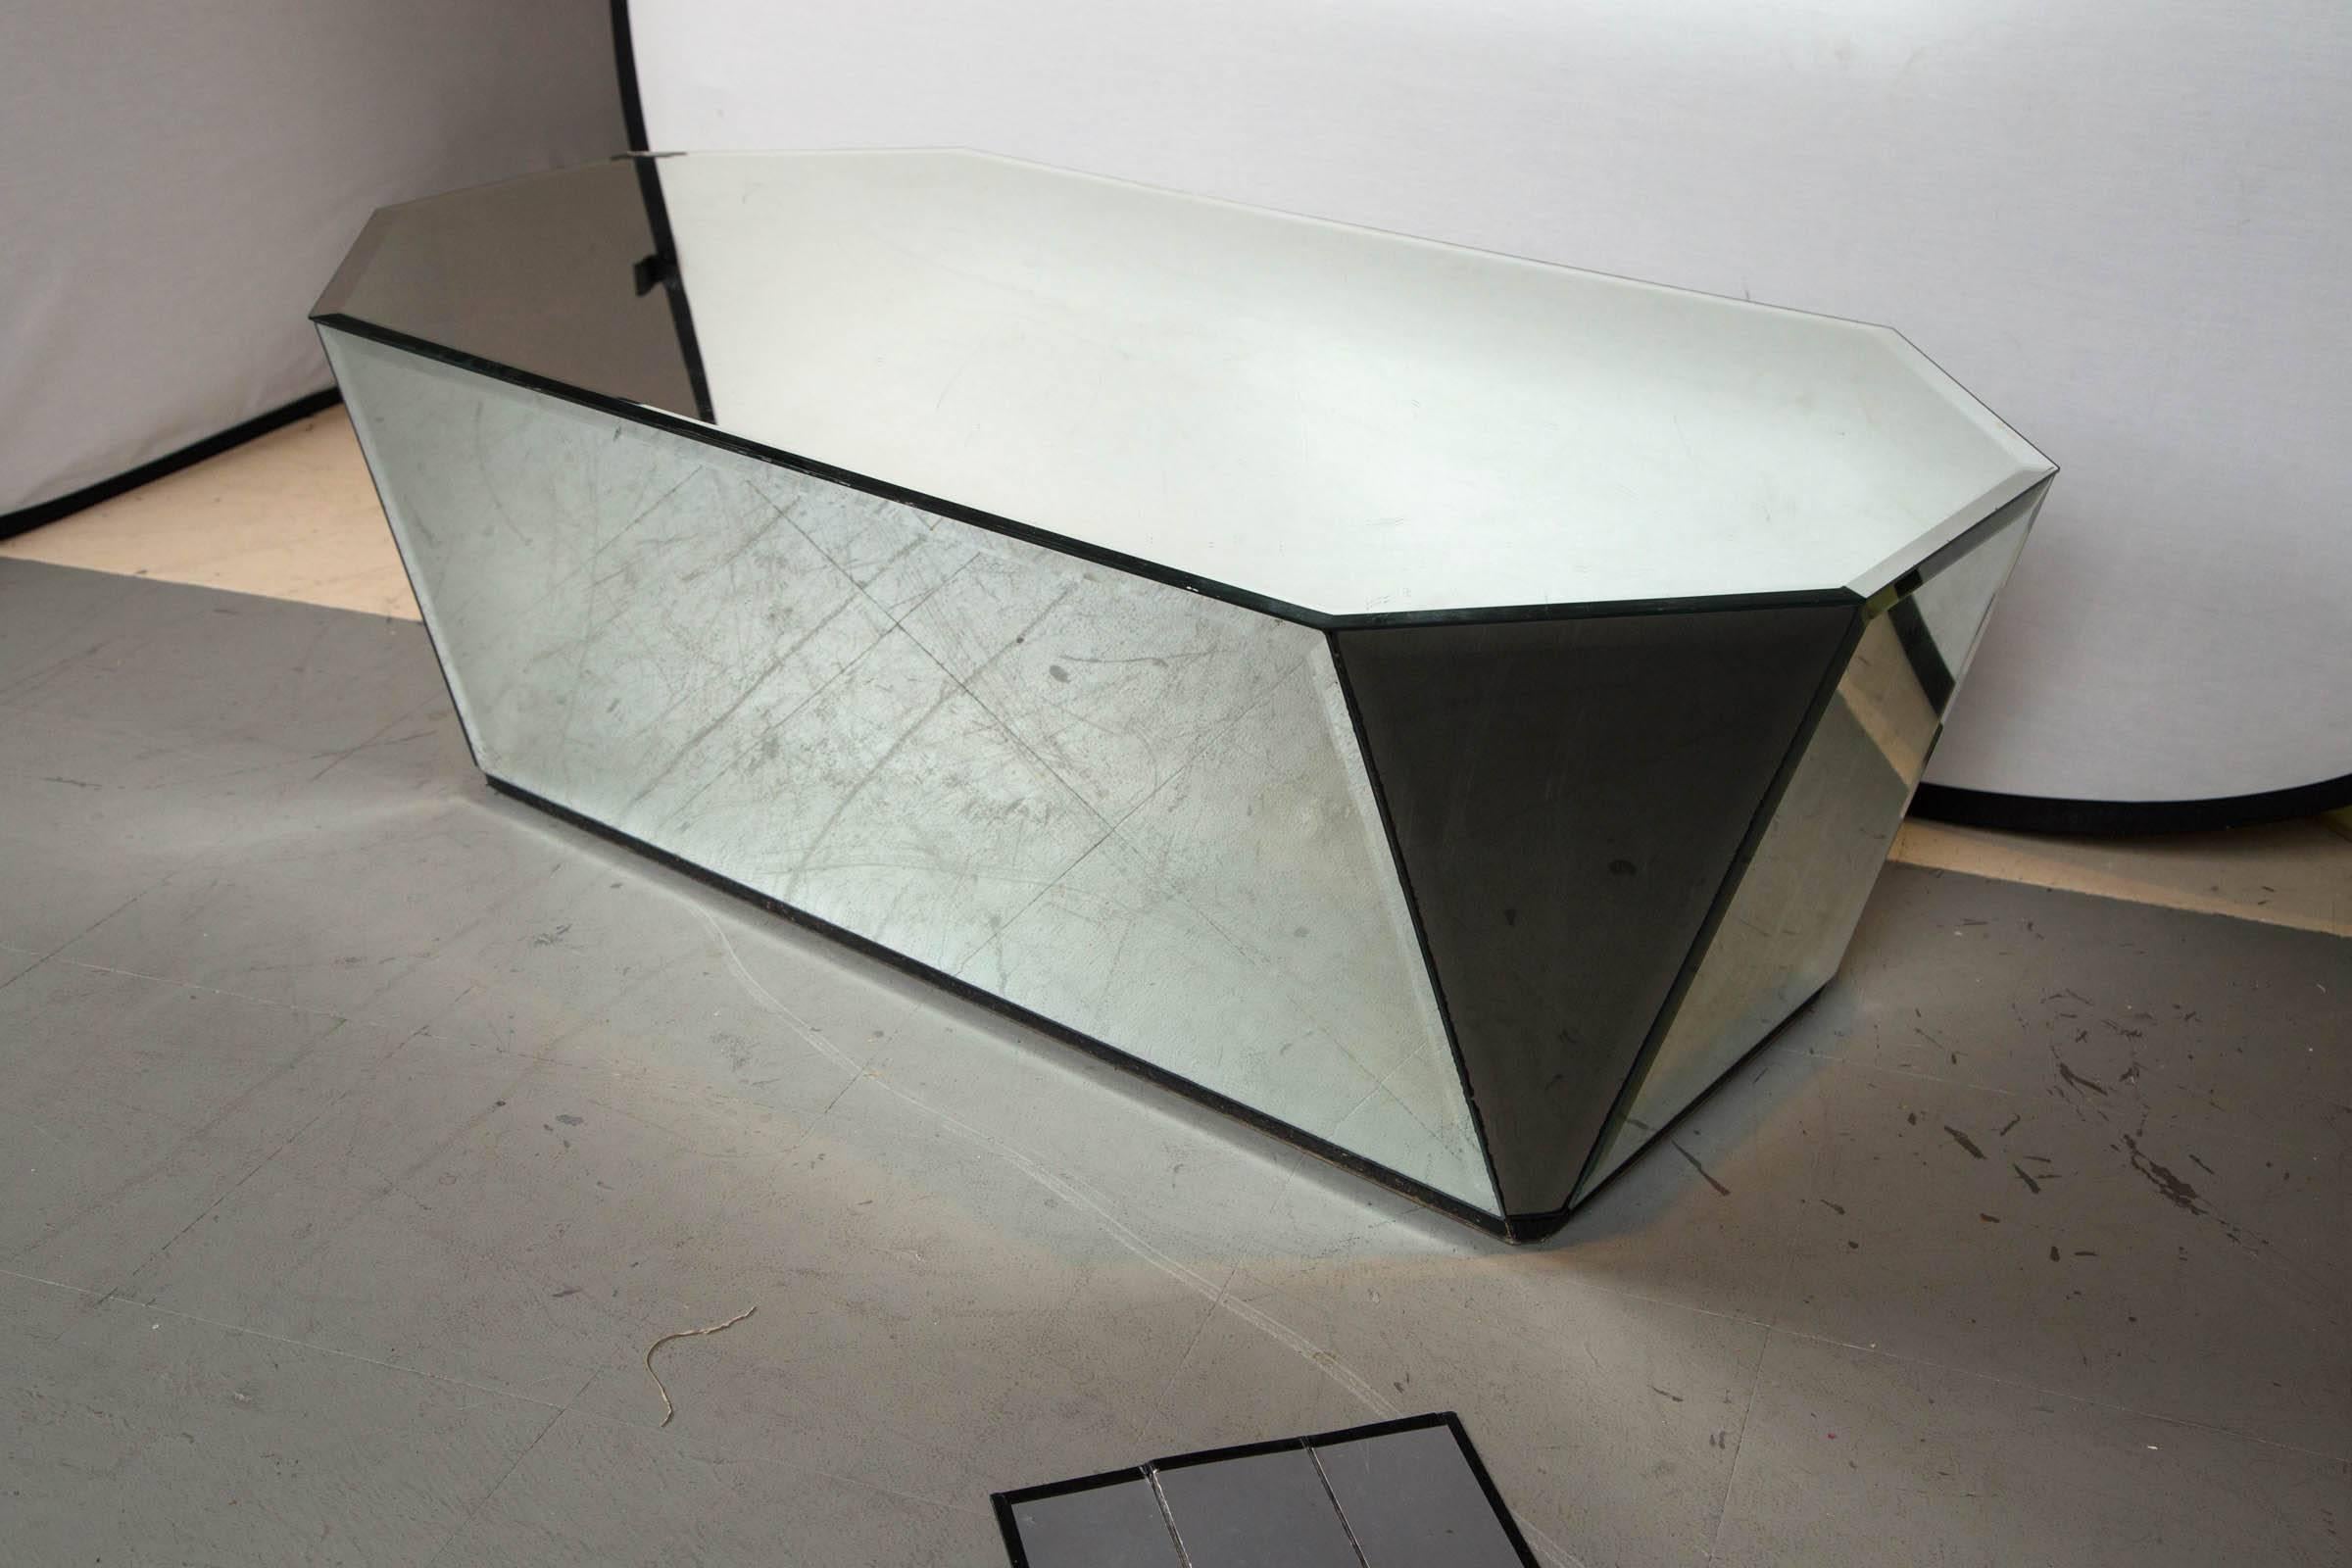 A art form mirrored coffee or cocktail table, circa 1970s. Having geometric angular mirrored panels in an artistic sculptural modernist style great as an show piece or for everyday use. Some minor surface scratches consistent with age no breaks or